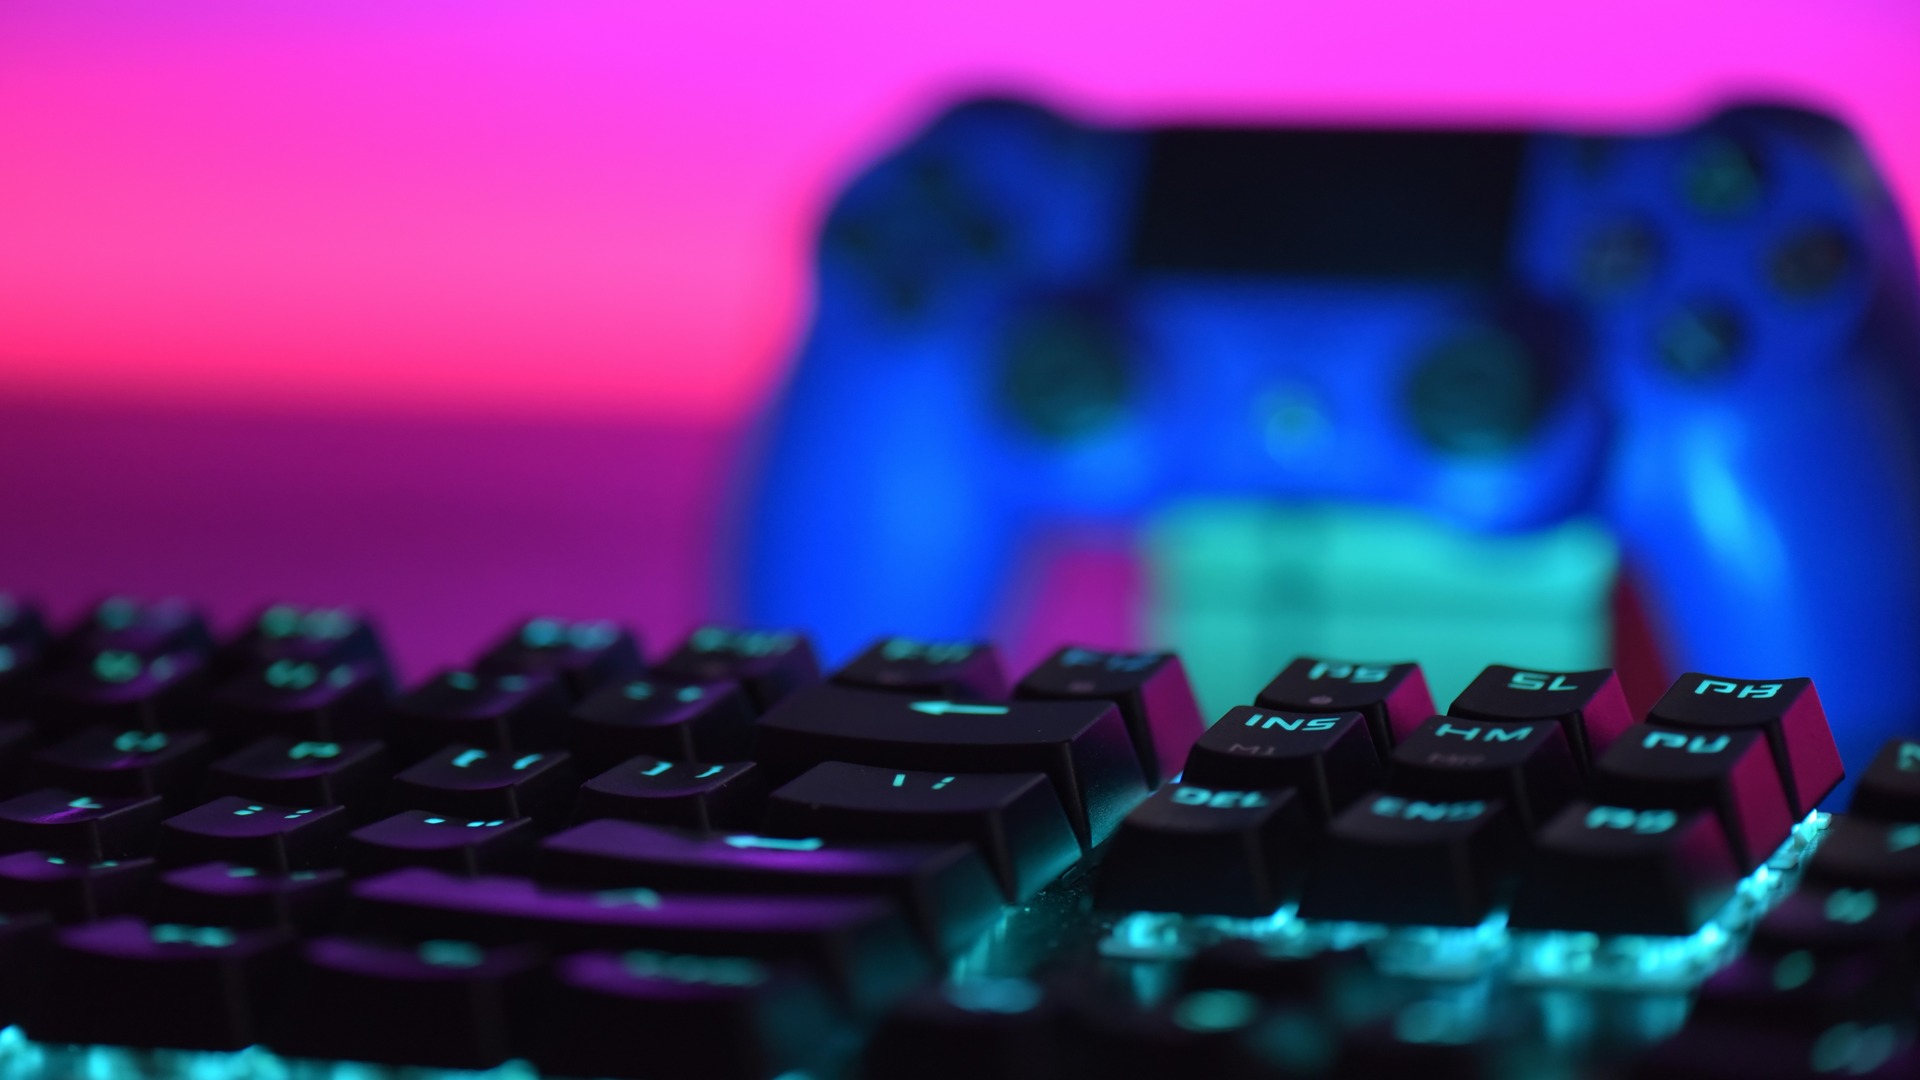 PC gaming vs. console gaming: The pros and cons